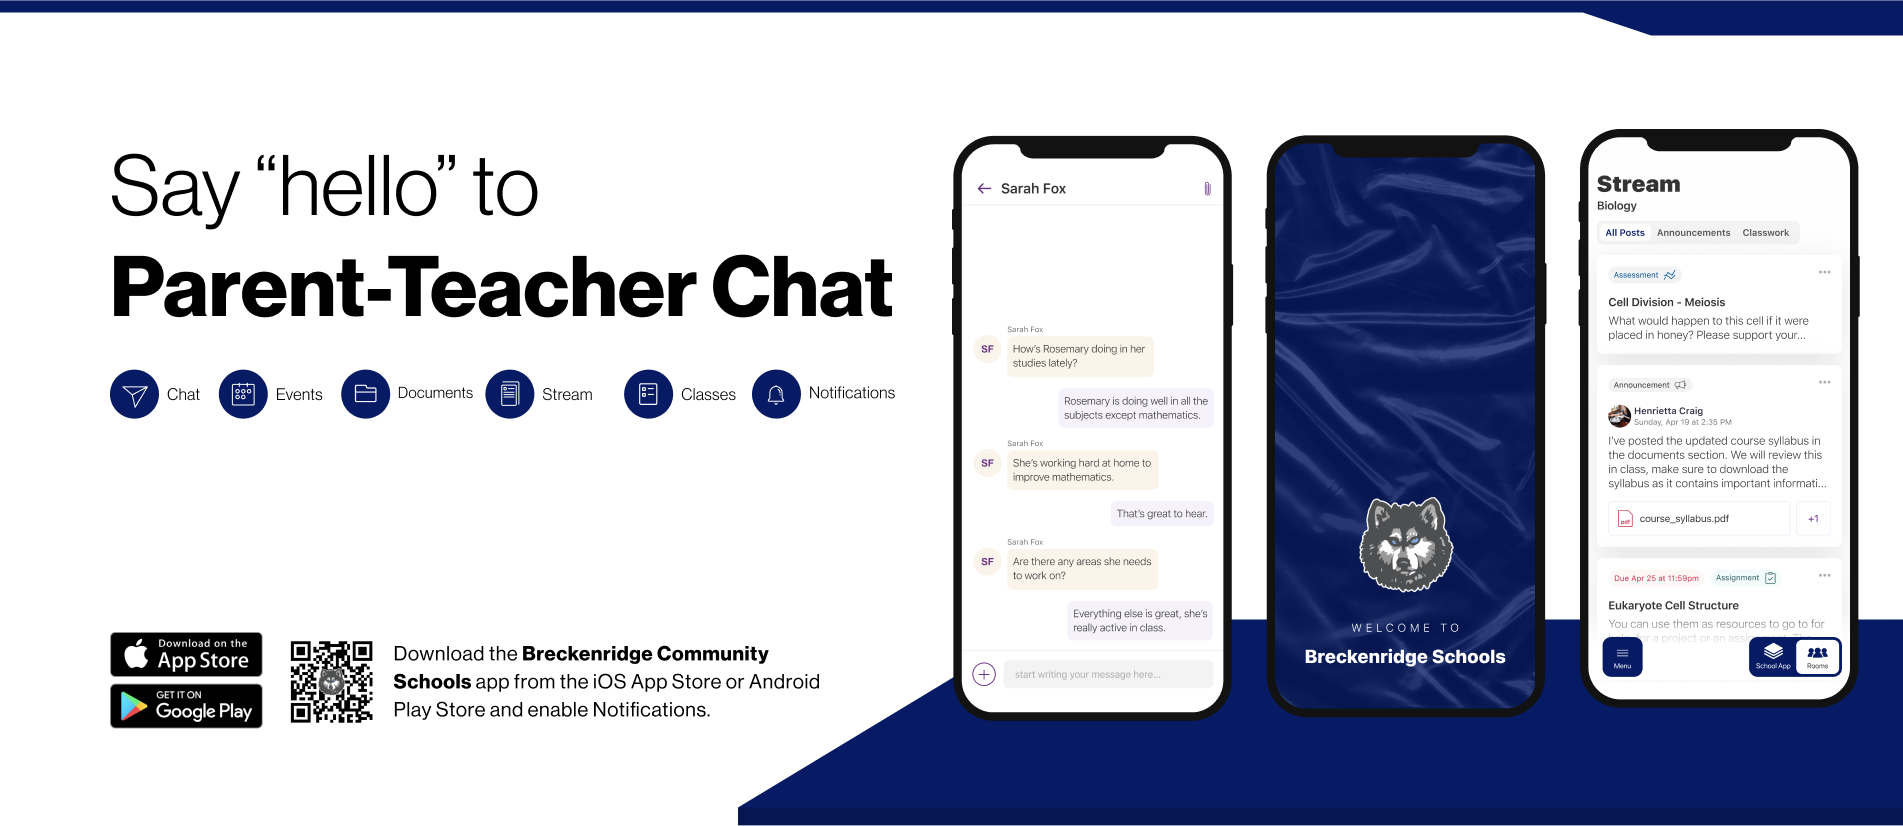 Say hello to Parent-Teacher chat in the new Rooms app. Download the Breckenridge Community Schools app in the Google Play or Apple App store.